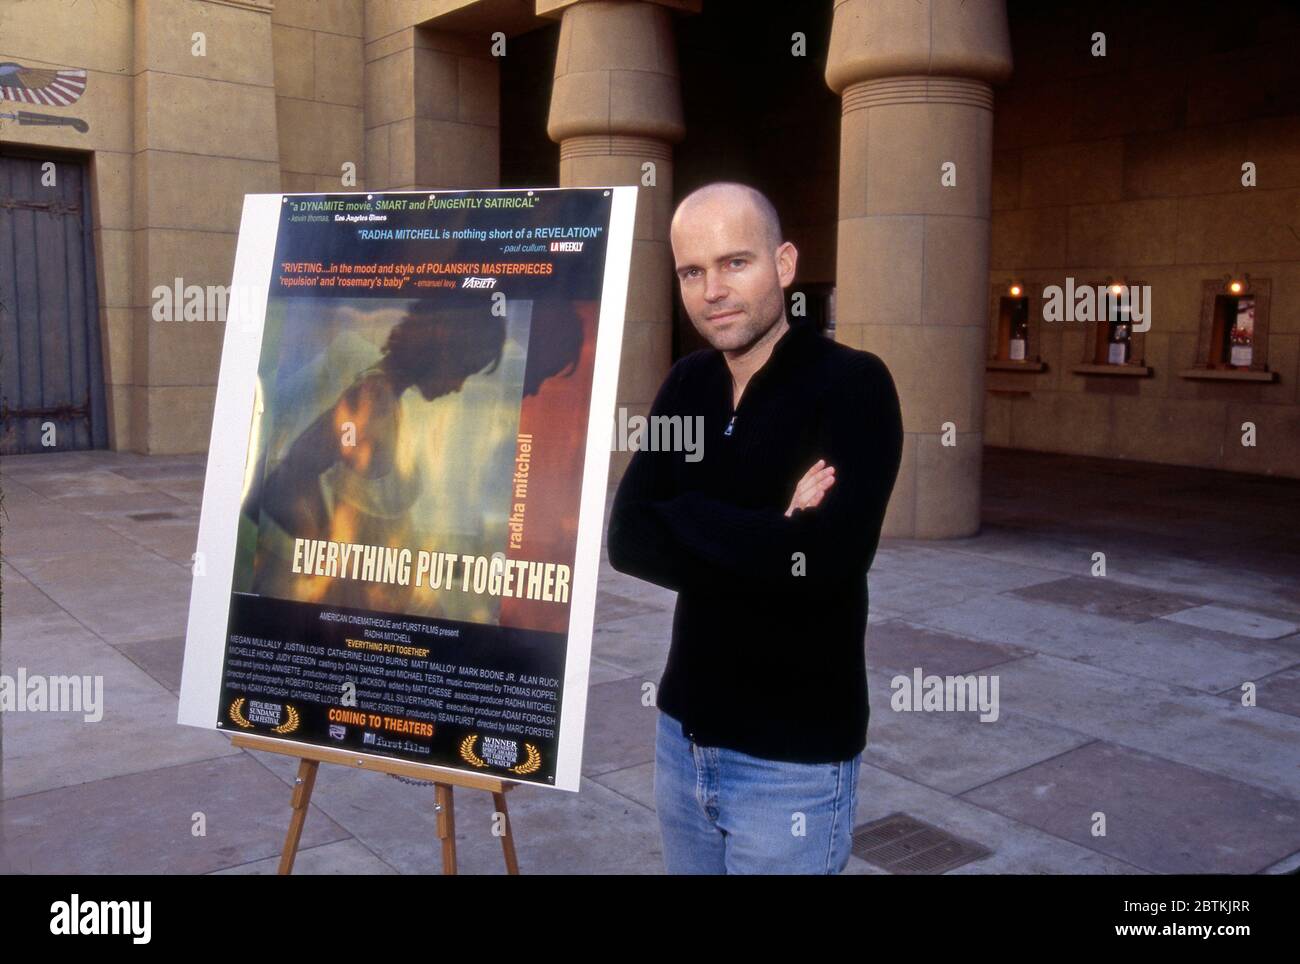 Director Marc Forster at the premiere of his film Everything Put Together at the Egyptian Theater in Hollywood, CA, Stock Photo